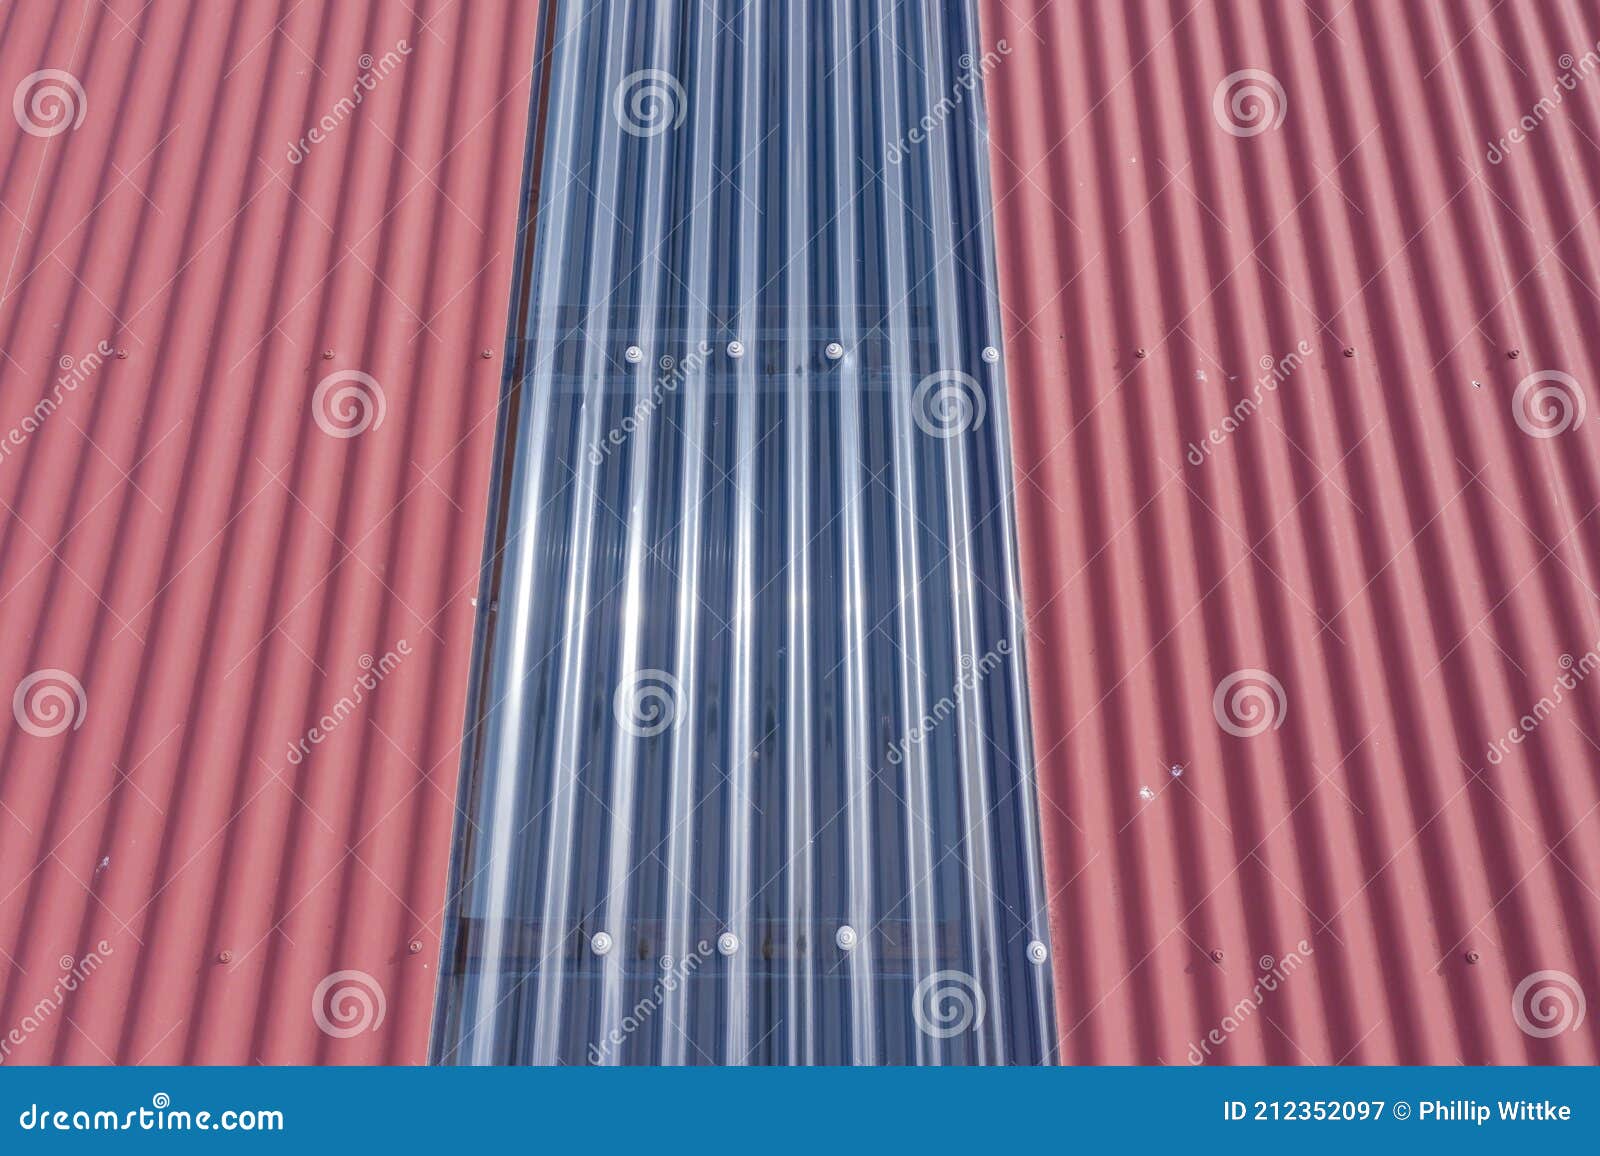 aerial view of corrugated iron and perspex roof panels